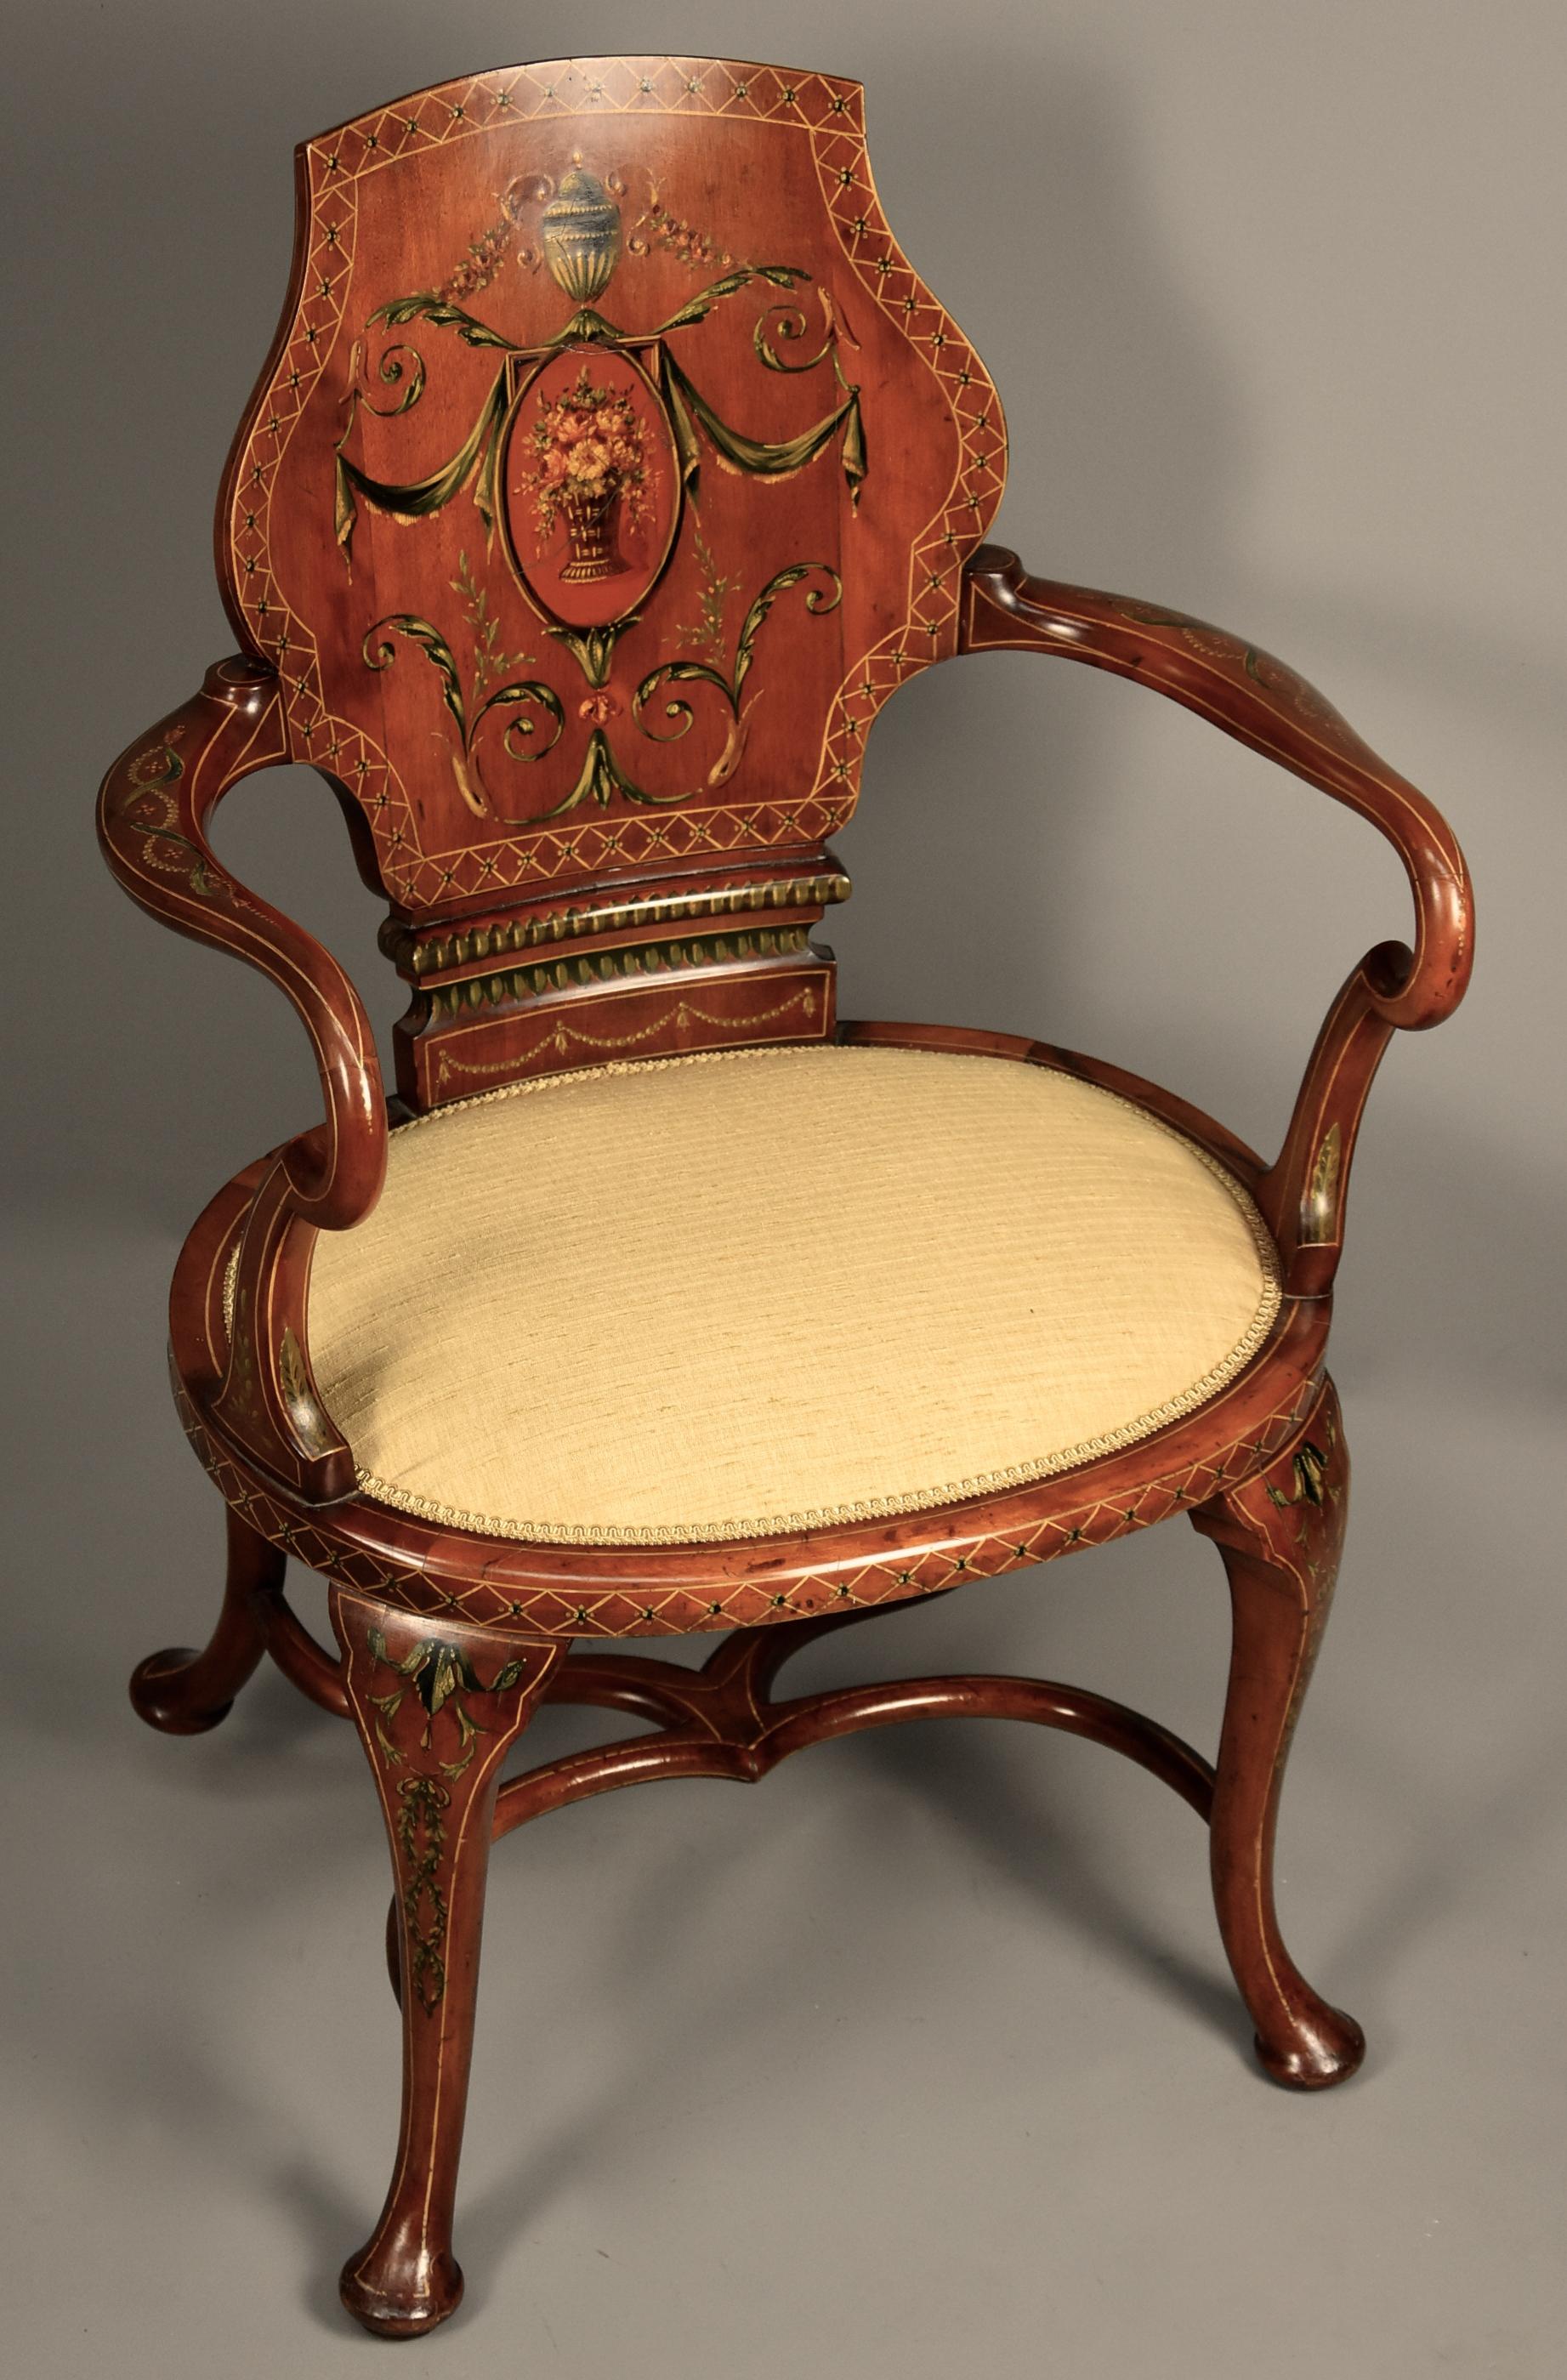 English Highly Decorative Edwardian Satinwood and Painted Armchair in the Georgian Style For Sale